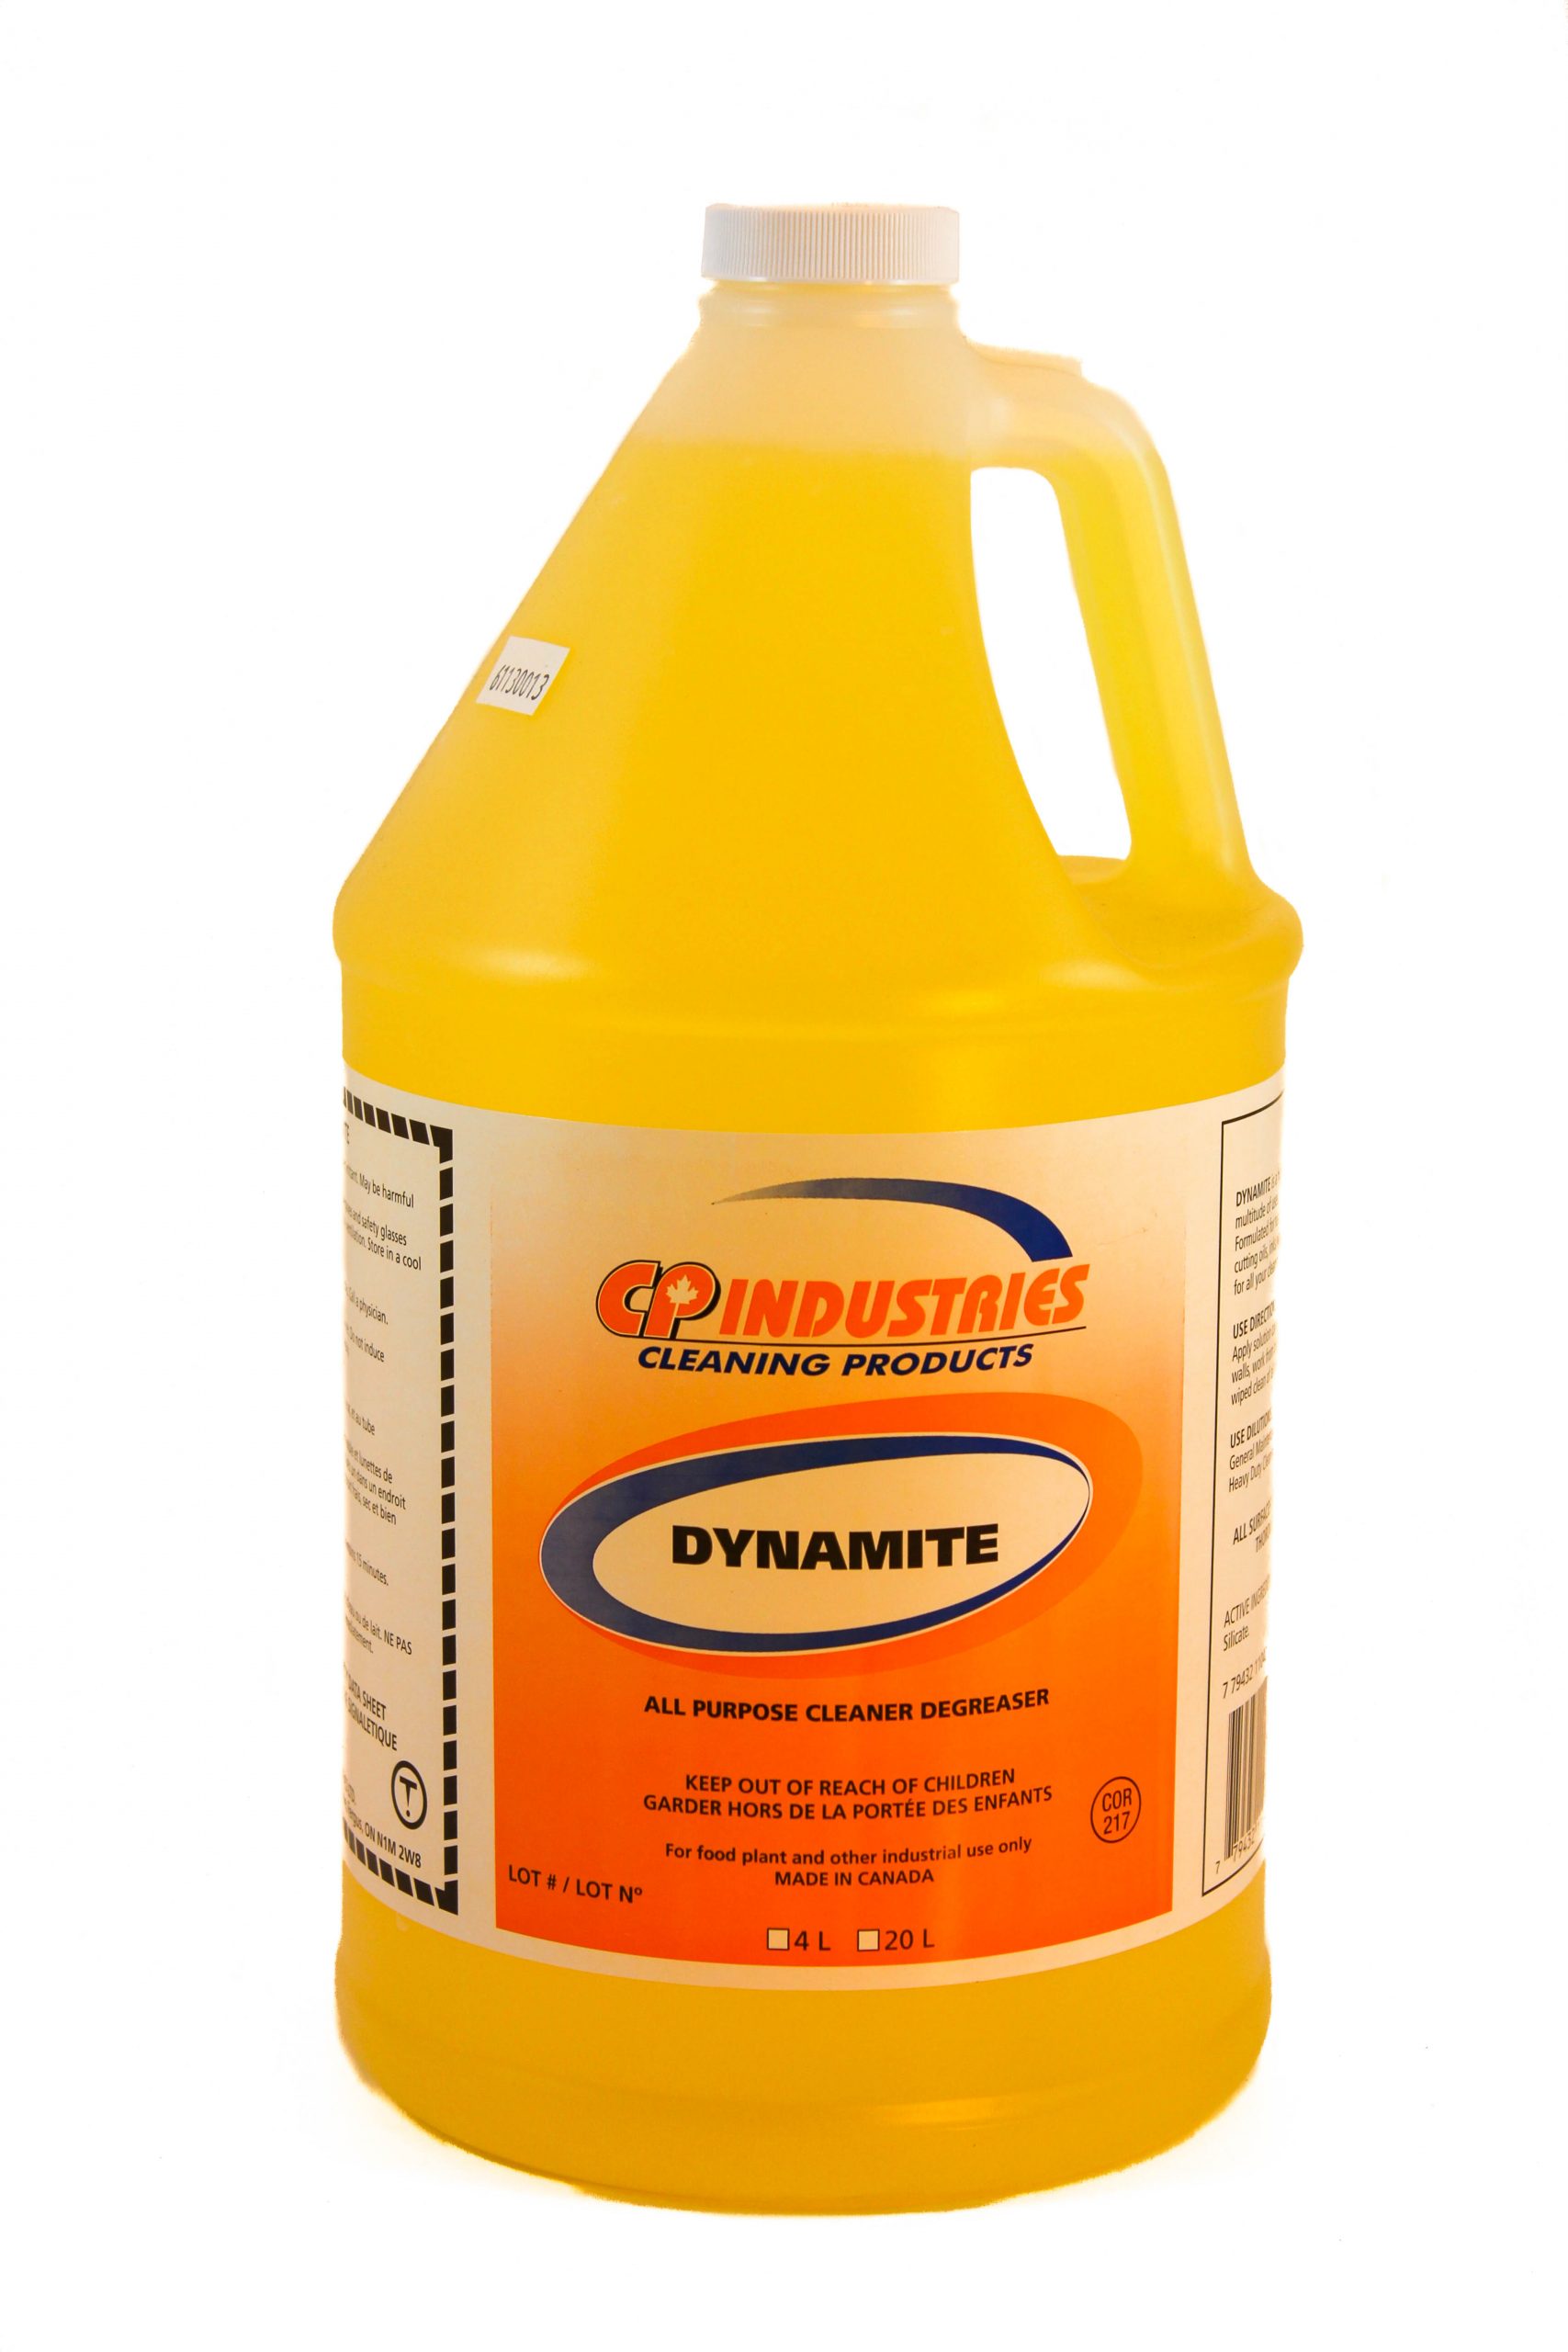 CP Industries: Dynamite, all purpose cleaner degreaser